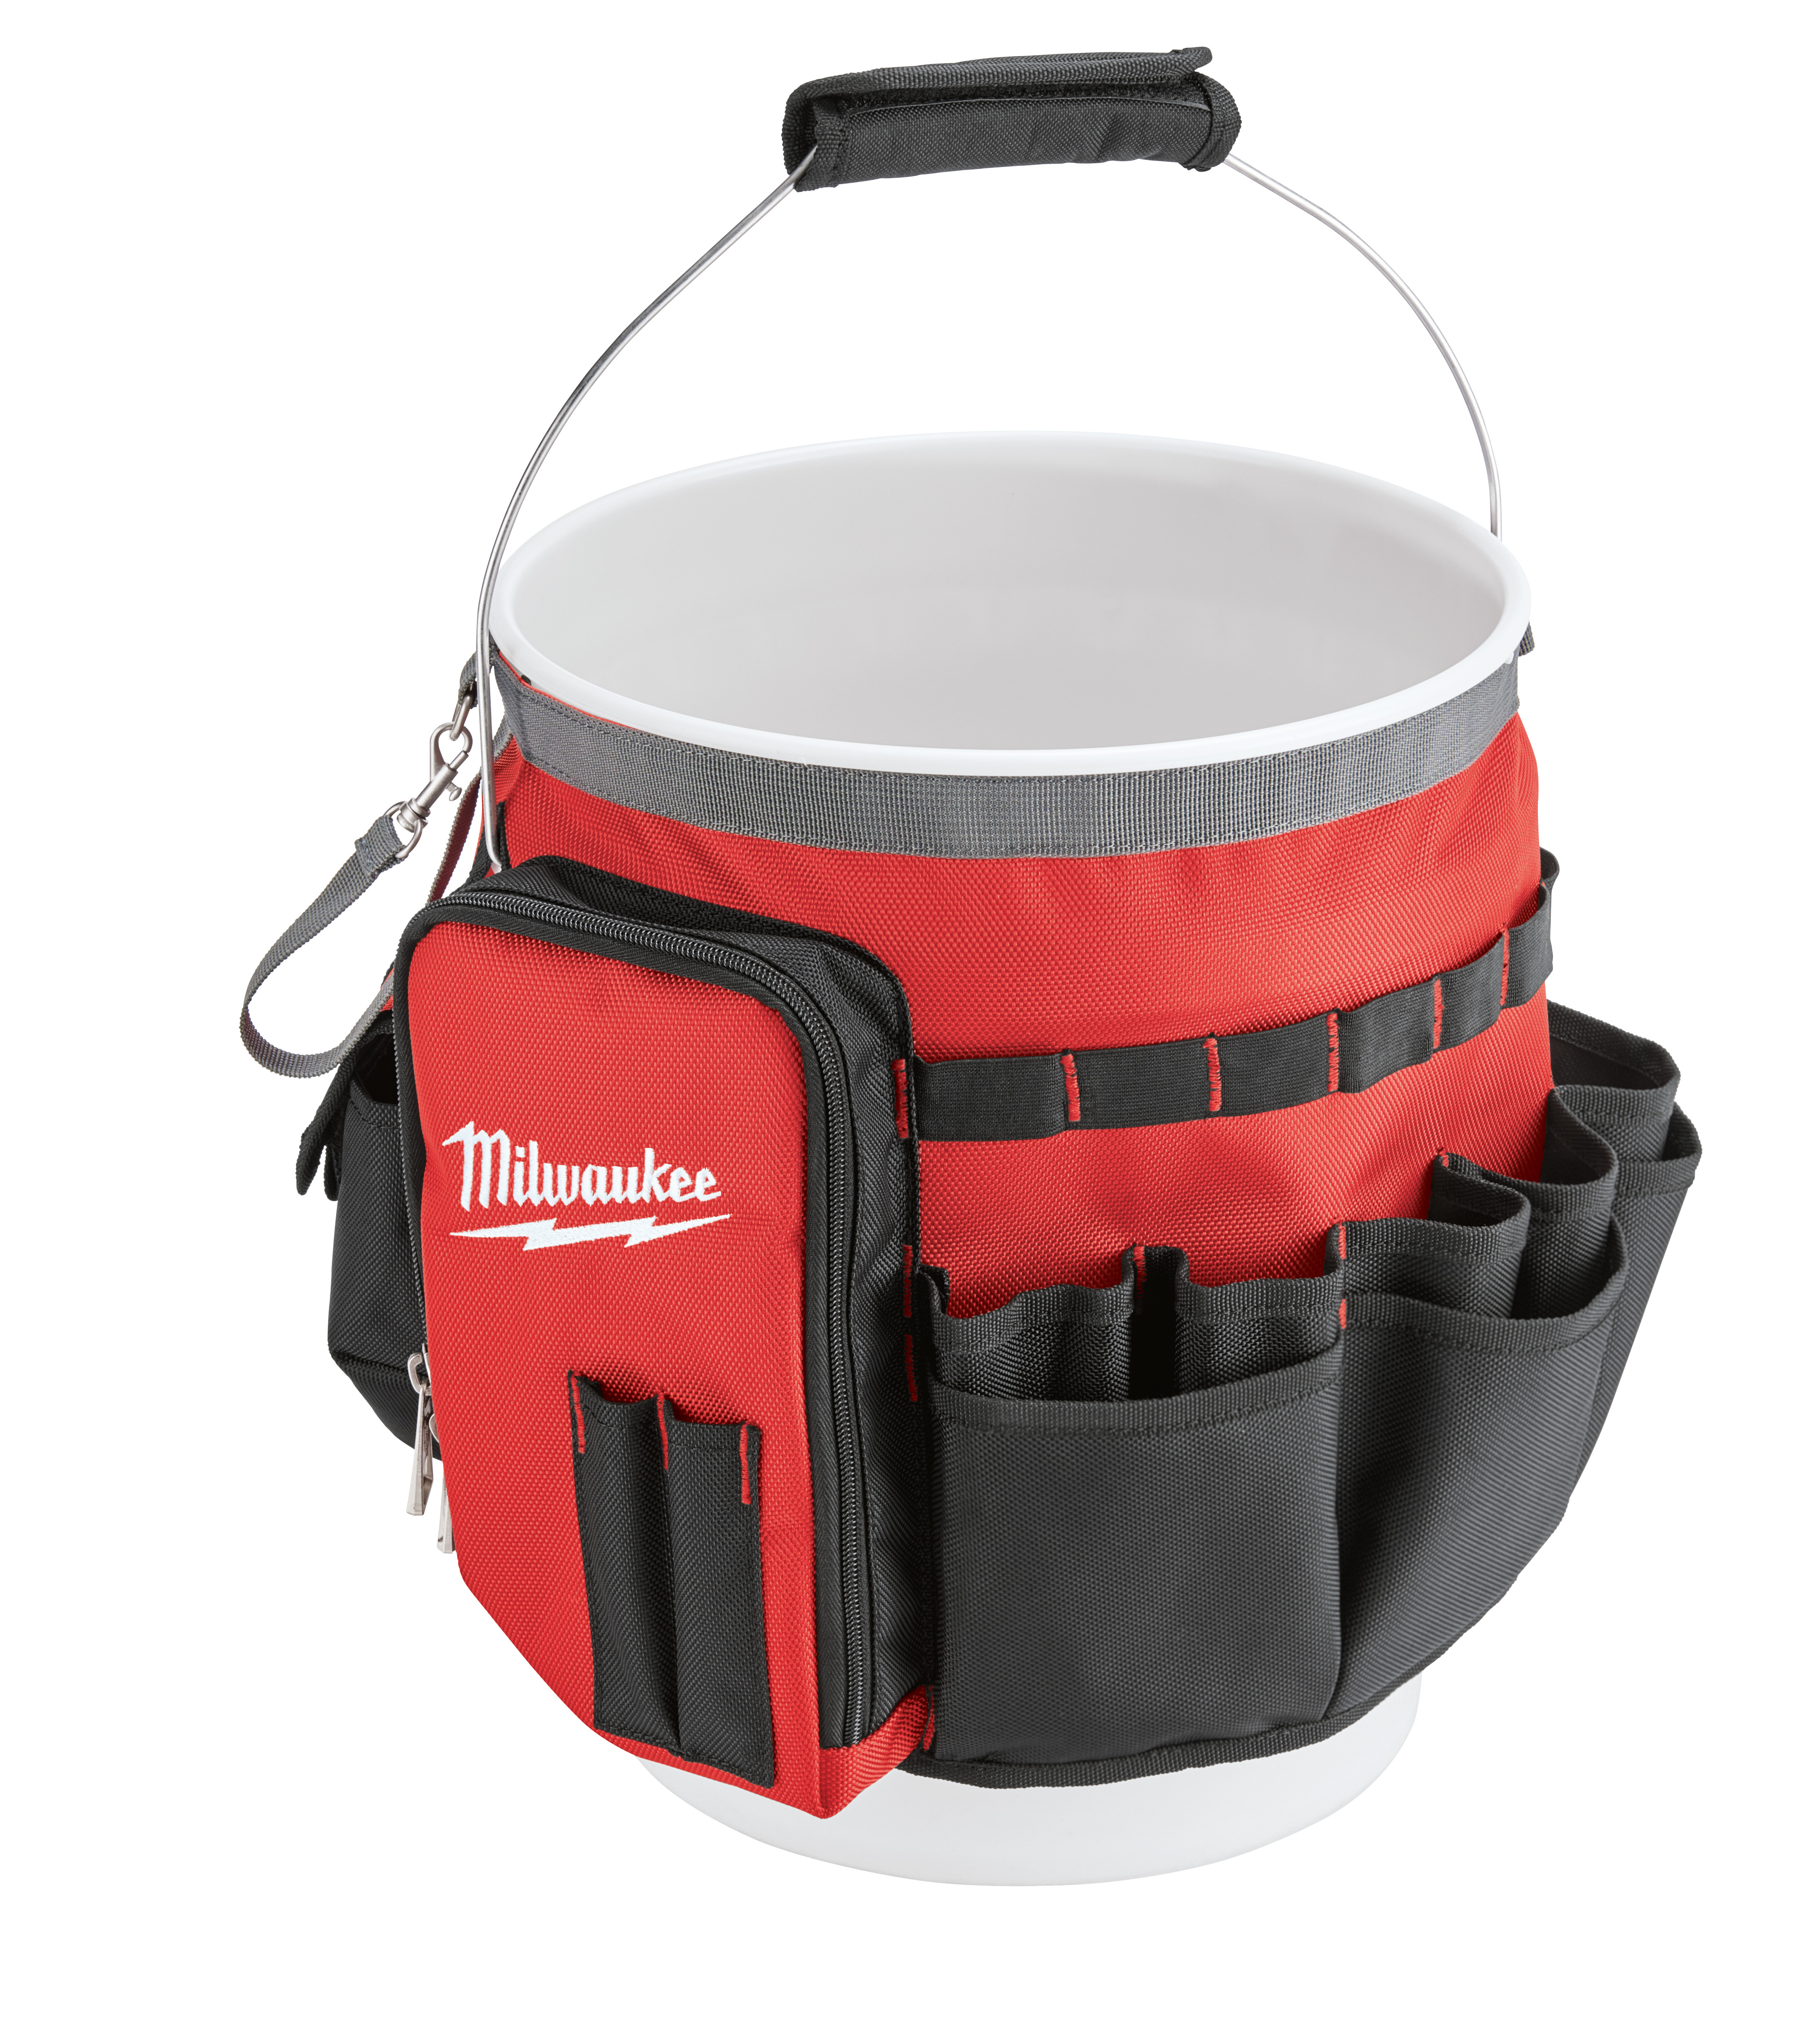 48-22-8175 045242479580 The Milwaukee bucket organizer wrap was designed to provide ultimate versatility and superior durability. Featuring an exterior wrap design, the bucket organizer allows for full use and access to, the interior of the bucket while providing 30 exterior pockets and 2 large zipper pockets for ultimate organization. Built with tear resistant 1680D ballistic material, the Milwaukee bucket organizer wrap provides the extreme durability and functionality that confirms Milwaukee's commitment to providing innovative, durable storage solutions.